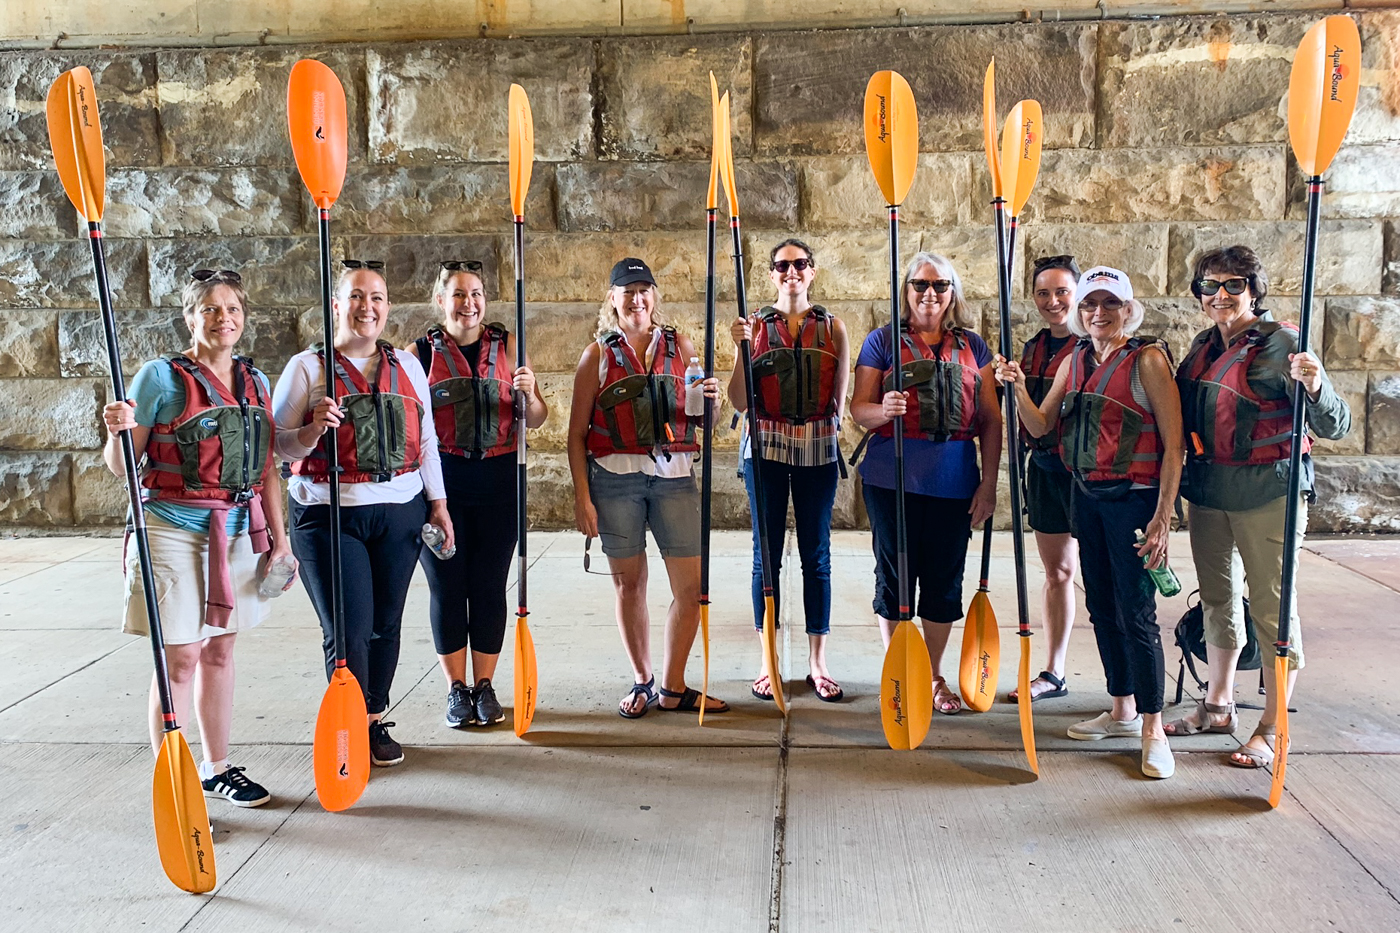 Women of Impact members prepare to embark on a kayaking session.